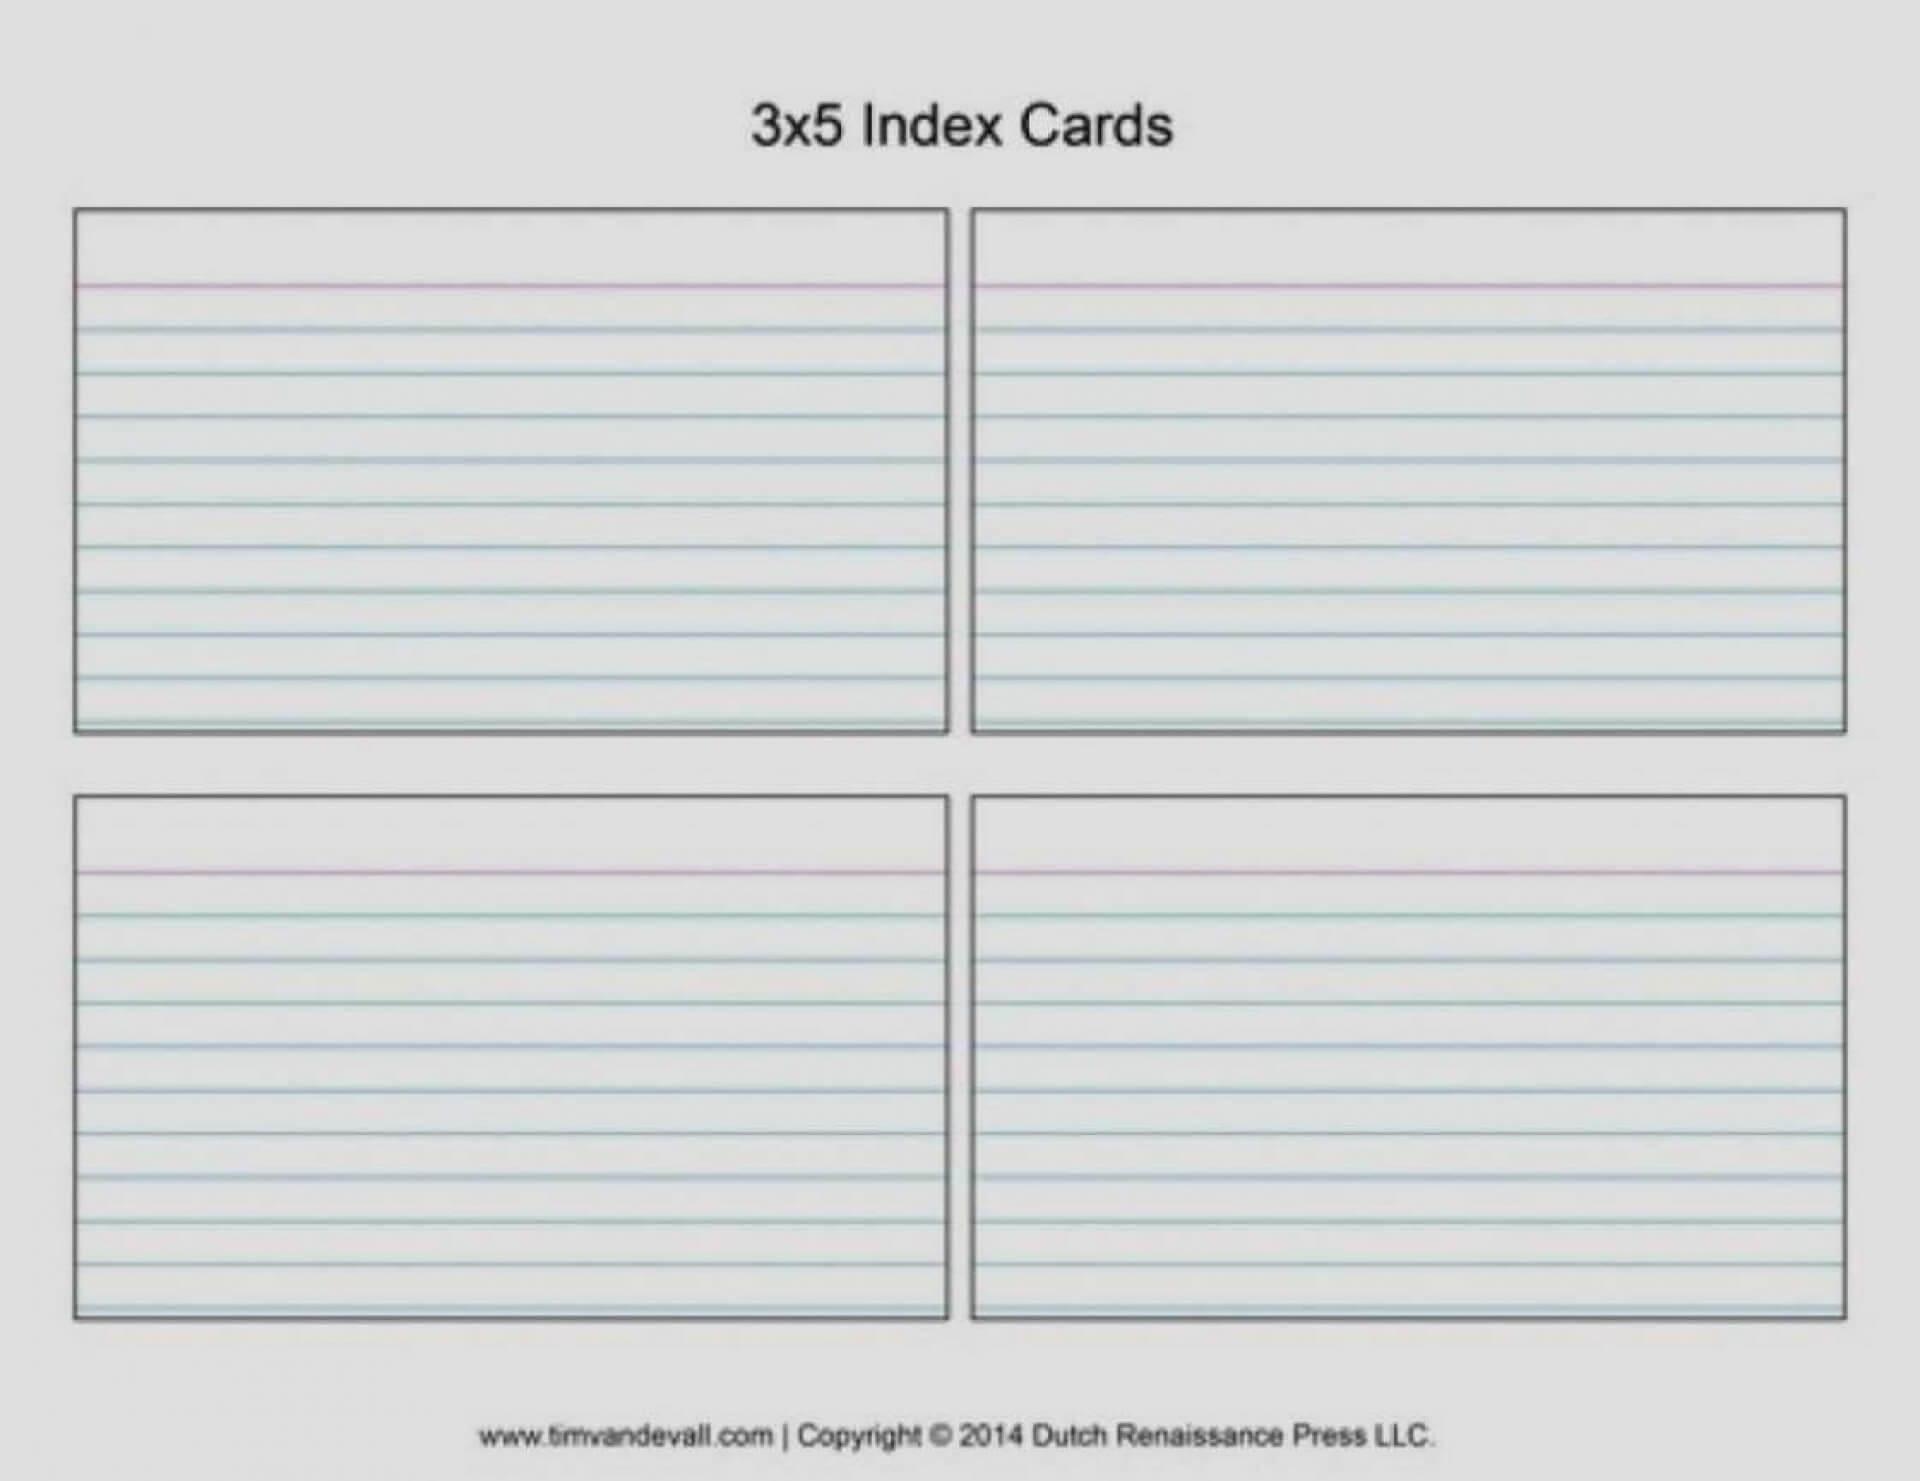 3 X 5 Index Card Template - Cumed With 3 By 5 Index Card Template